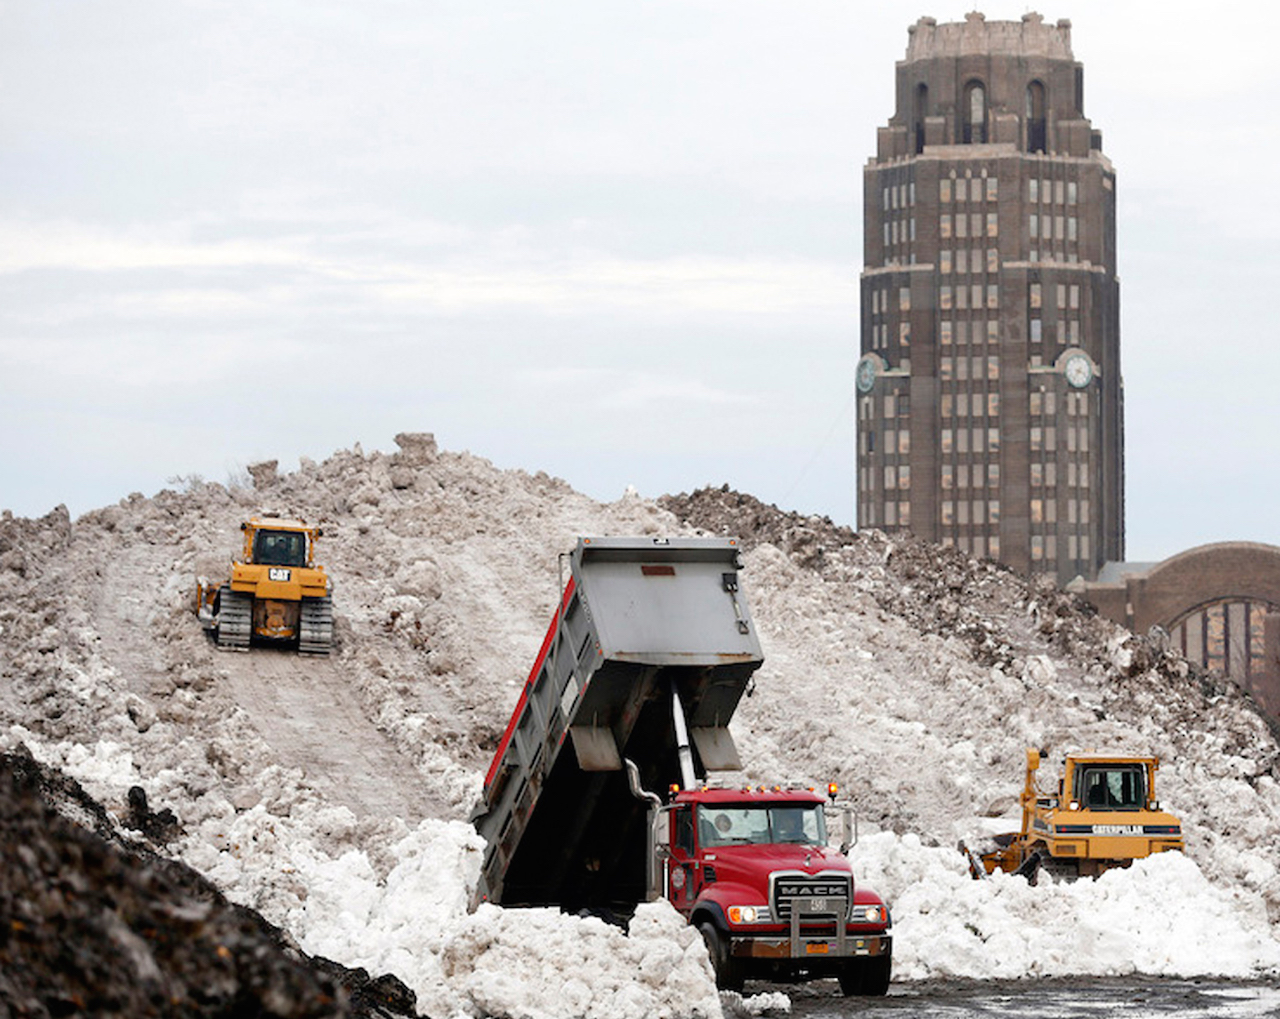 Why Haven’t These Dirty Piles Of Snow Melted Already?